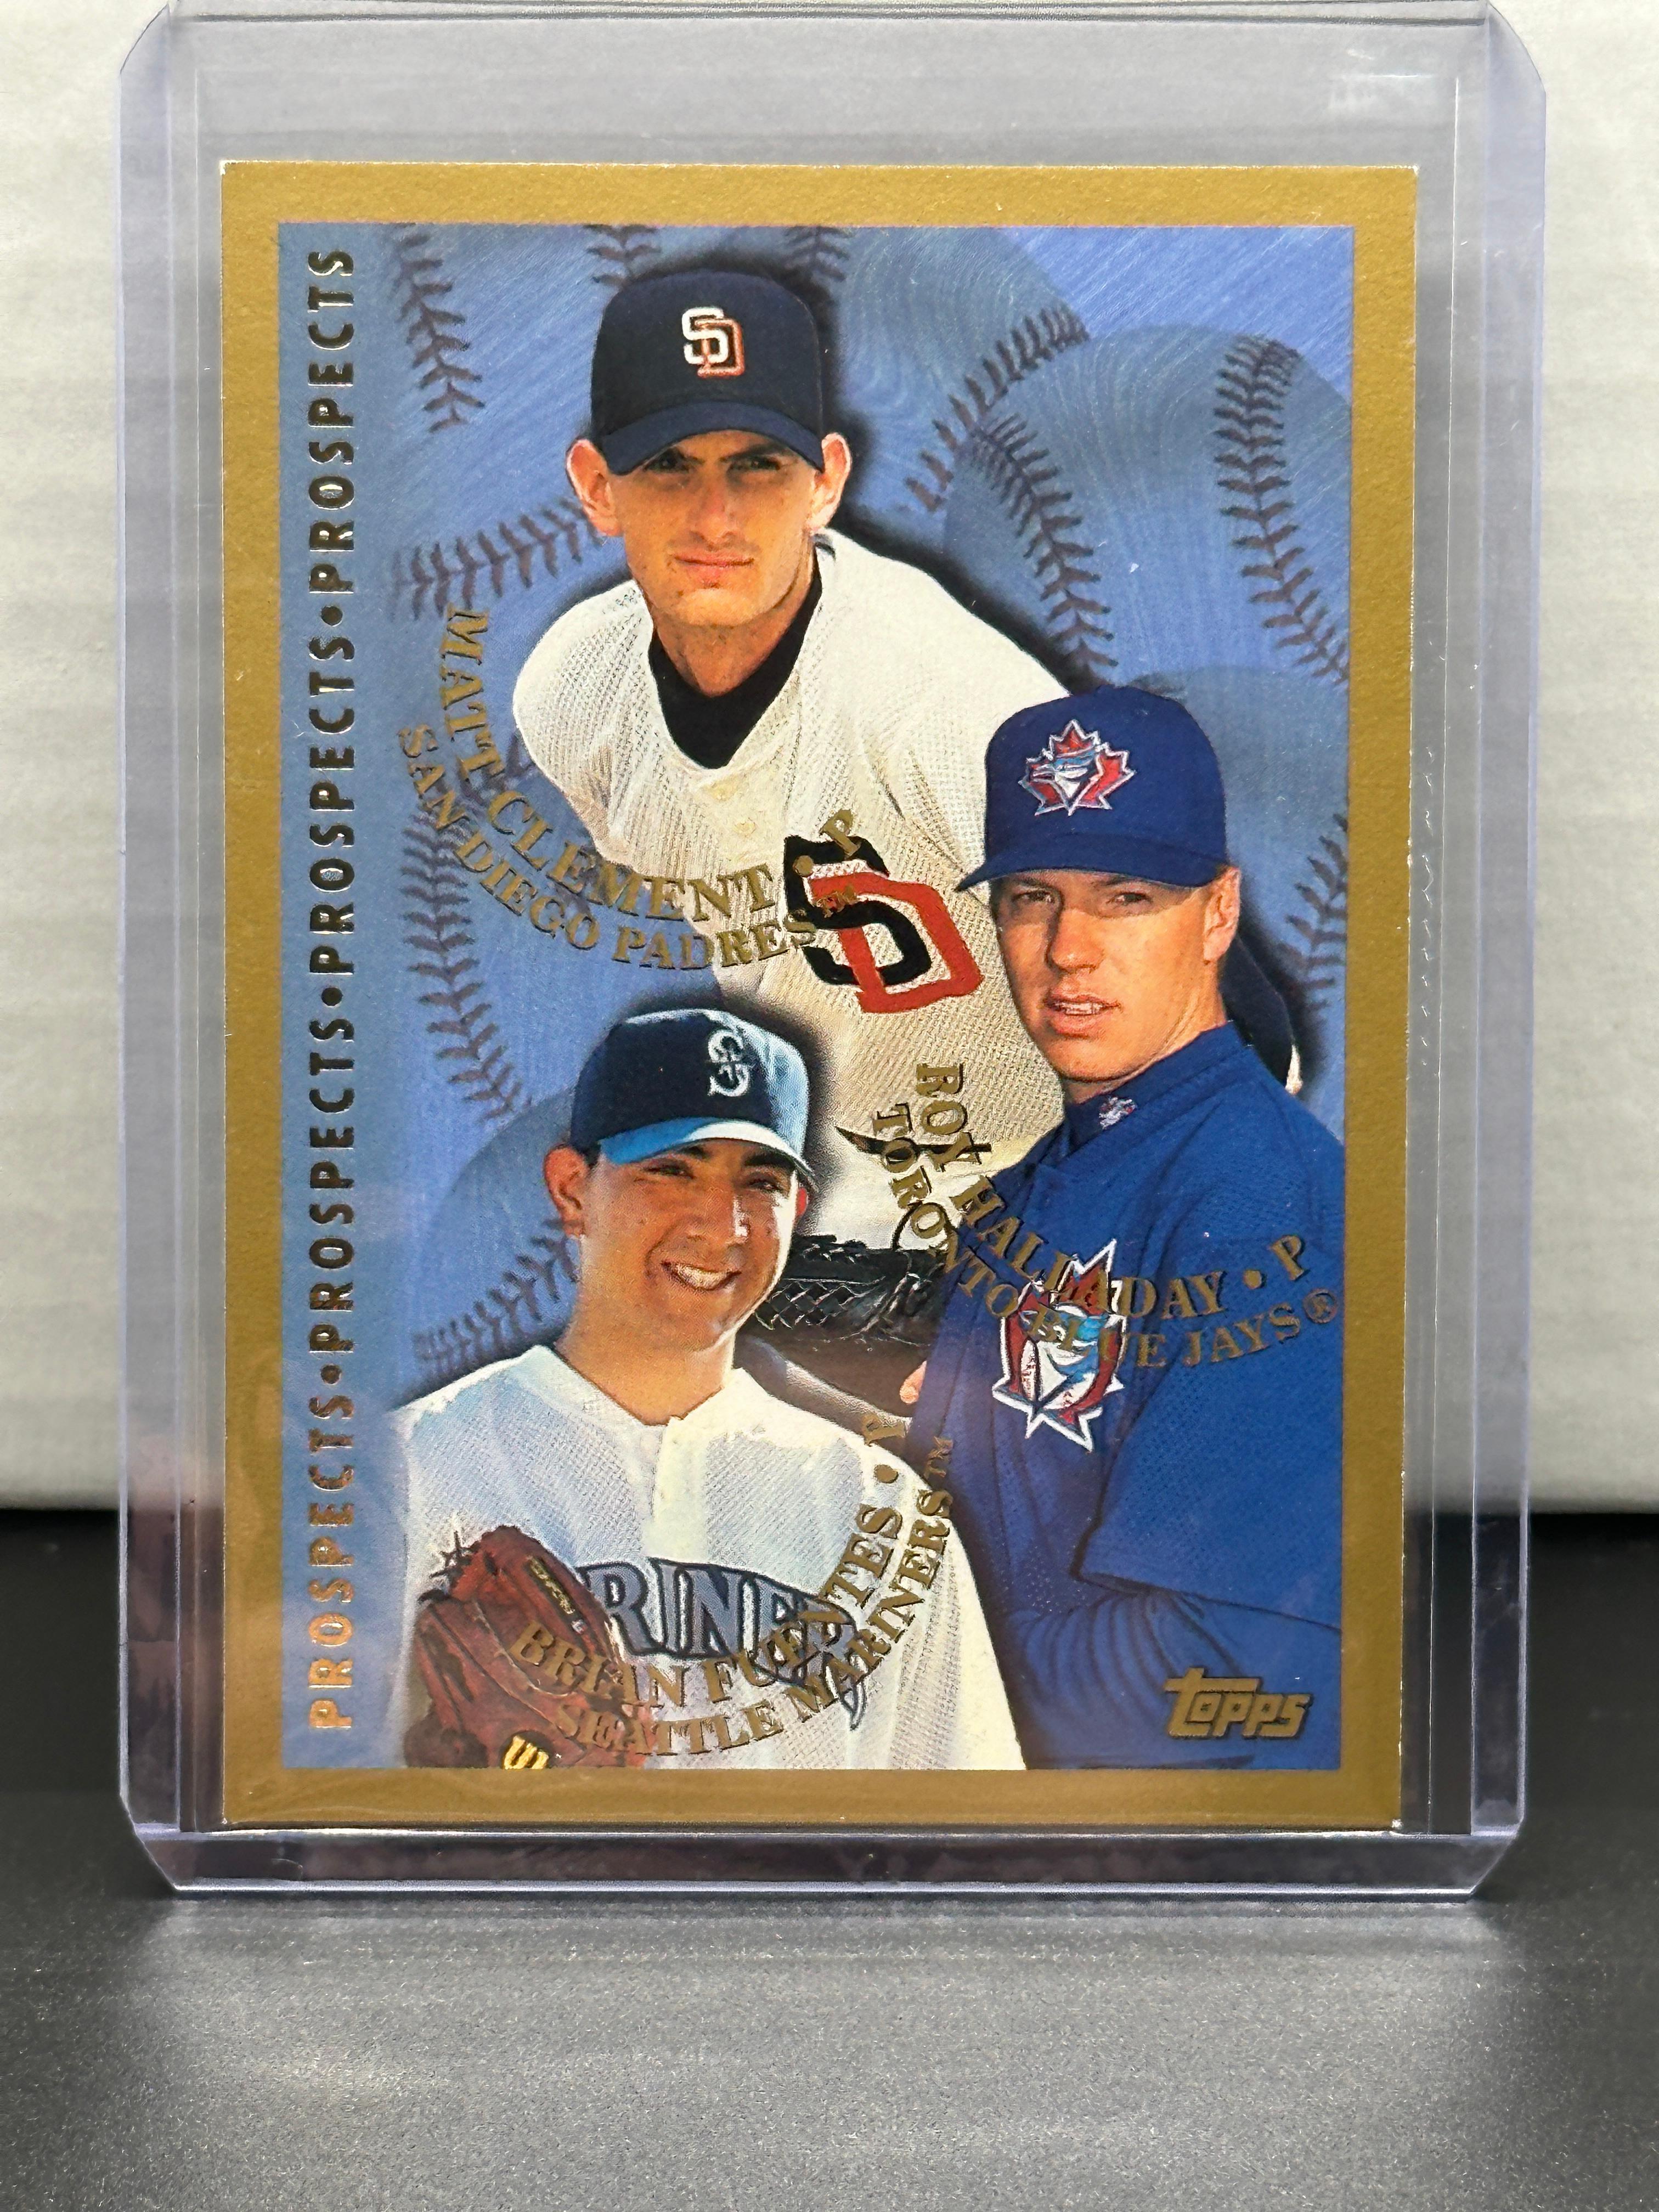 Roy Halladay Matt Clement 1998 Topps Top Prospects Rookie RC #264